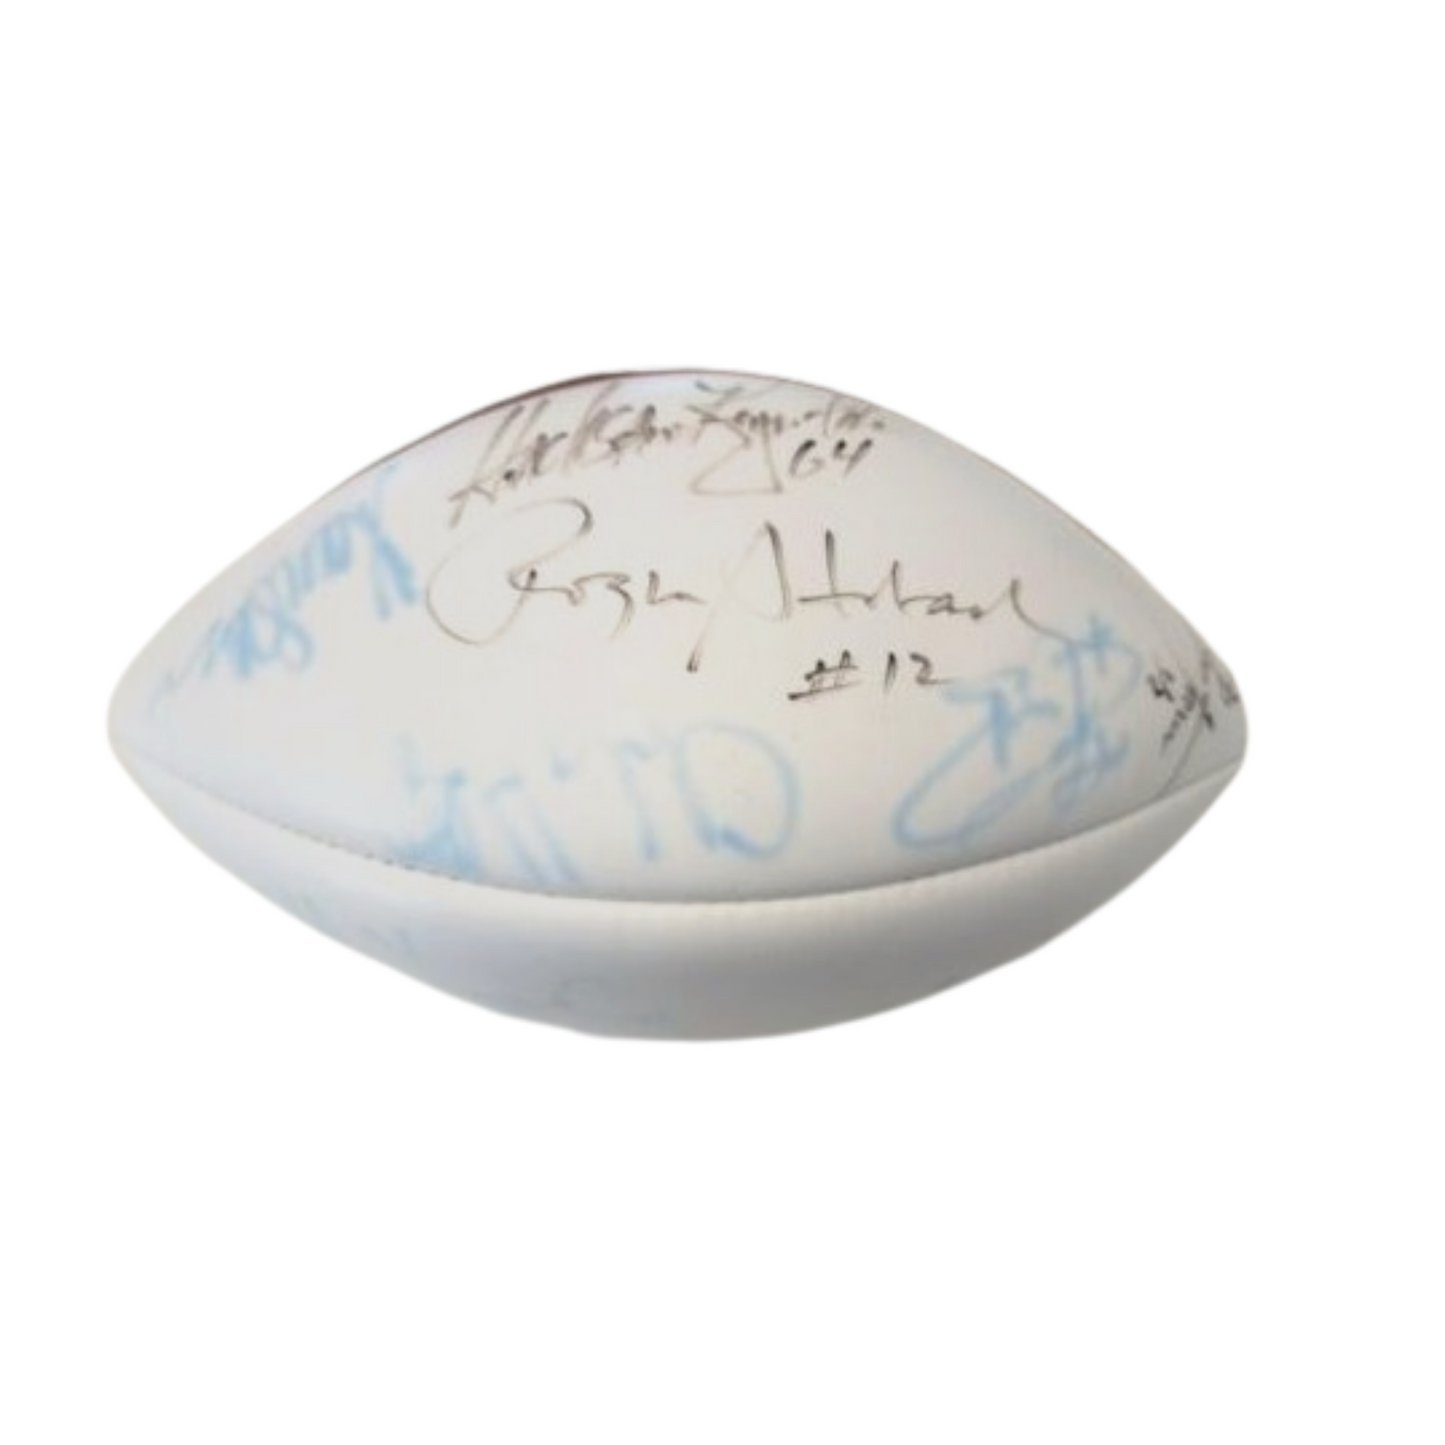 Super Bowl 29 Autographed Football - 9 All-Stars, including Emmitt Smith - JSA Letter of Authenticity